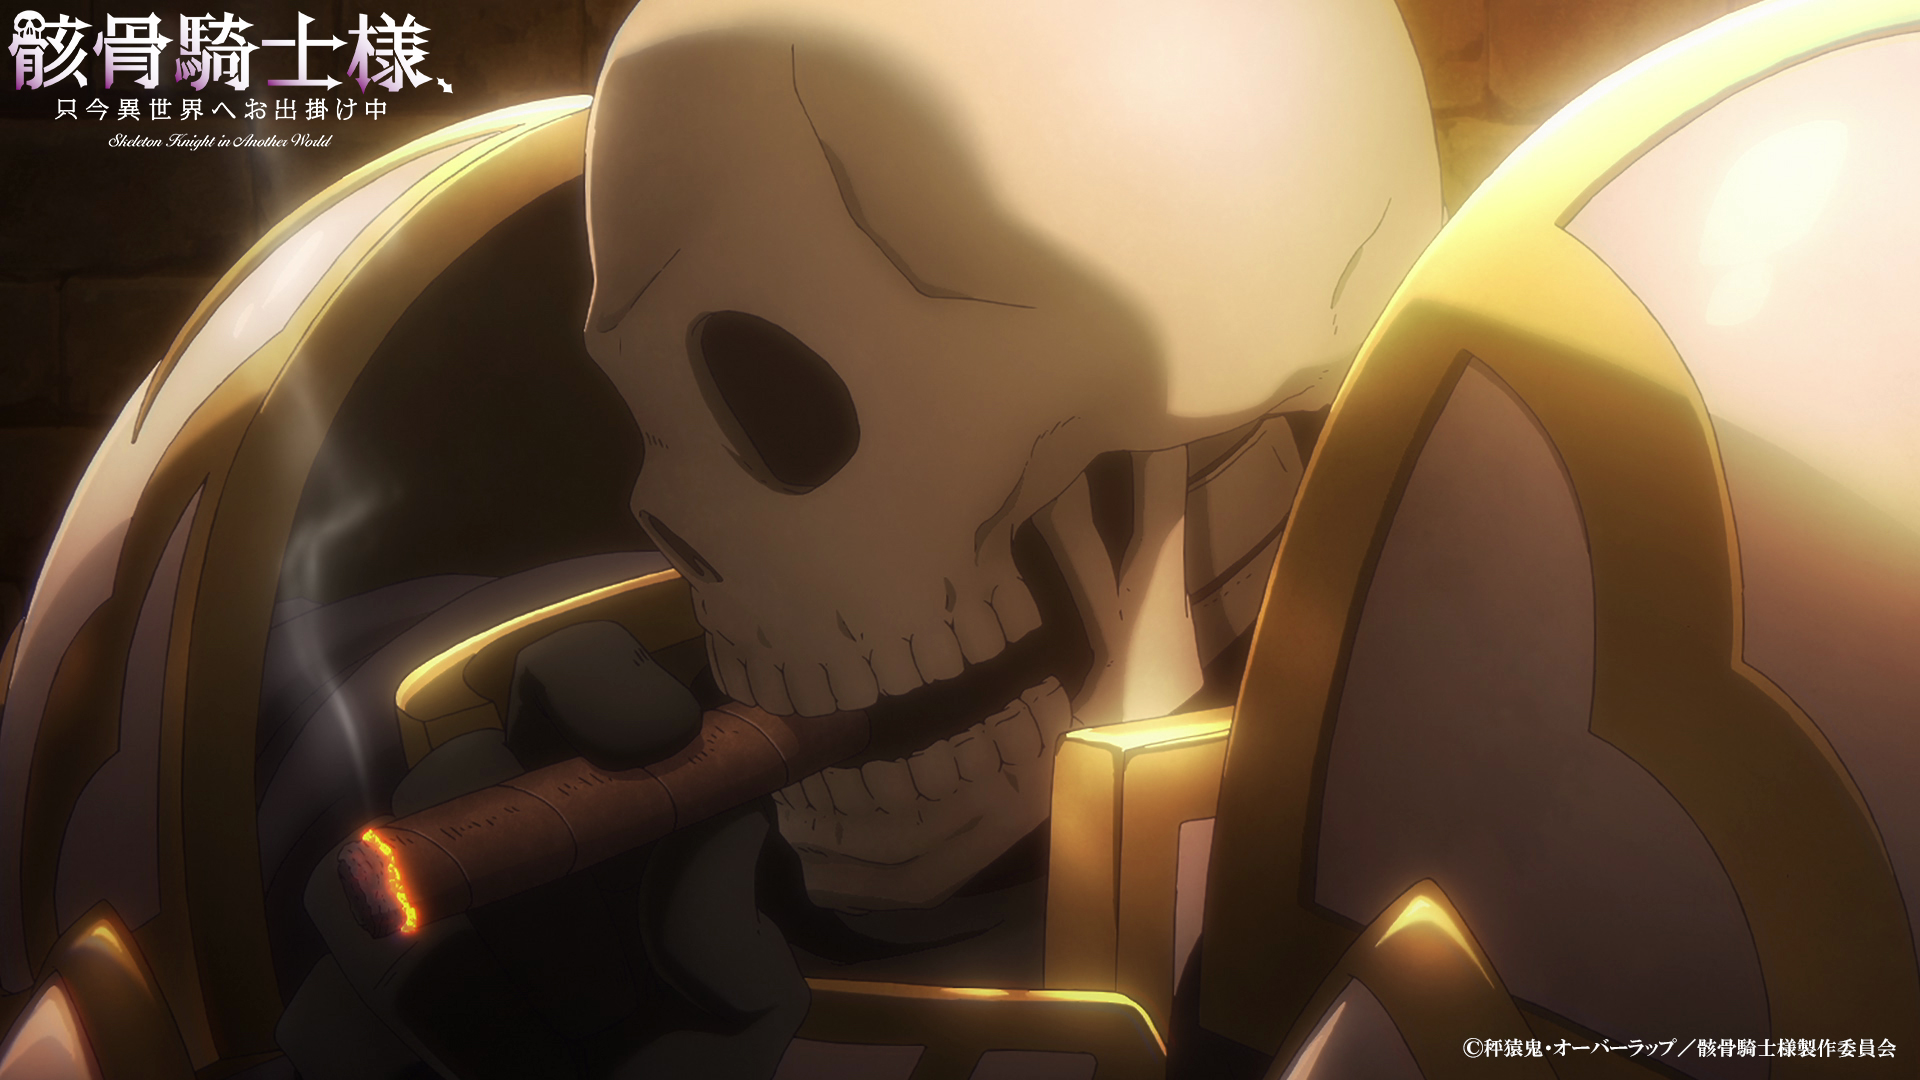 Skeleton Knight in Another World English dub release date on Crunchyroll coming soon